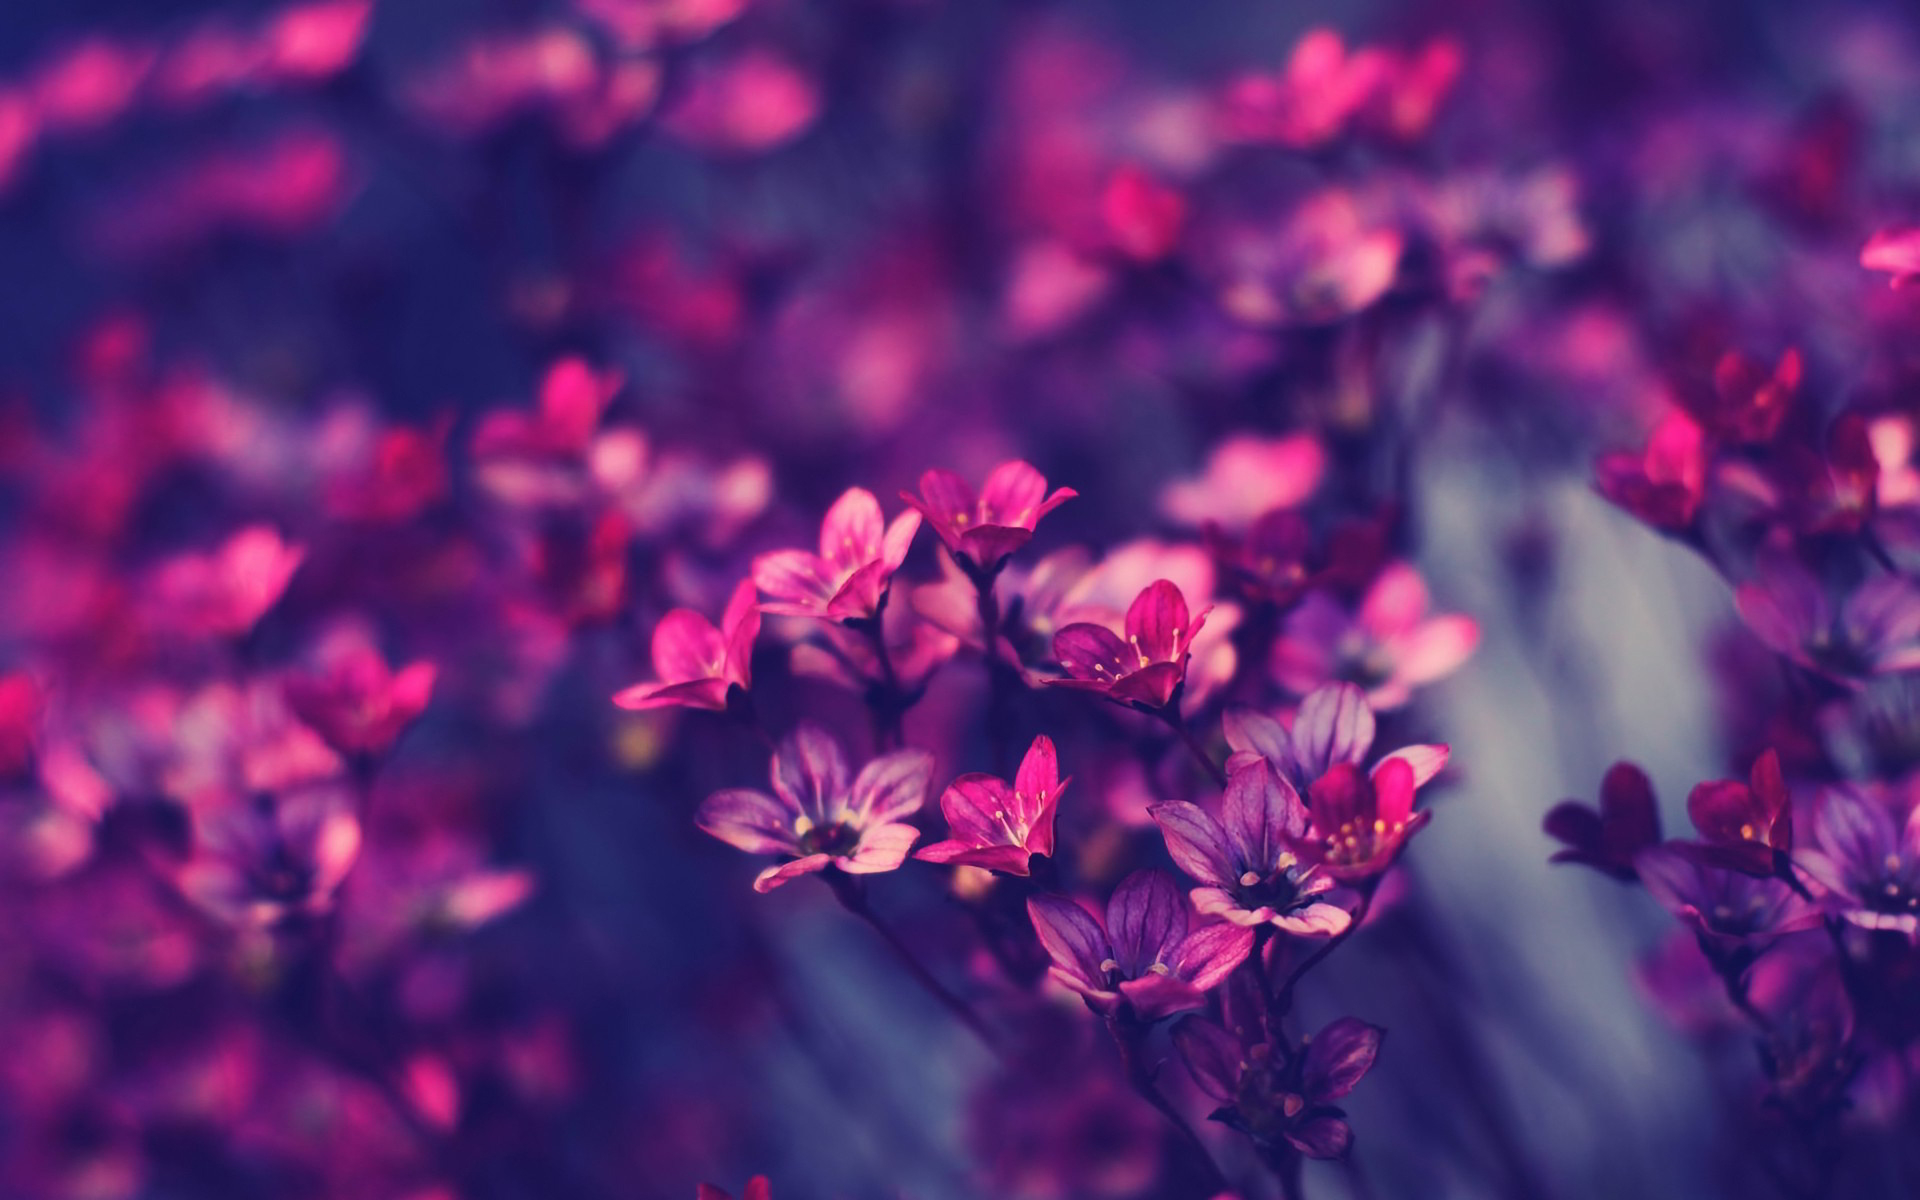 Hd Purple Wallpaper Image To Use As Background - Flower Background Hd Purple , HD Wallpaper & Backgrounds